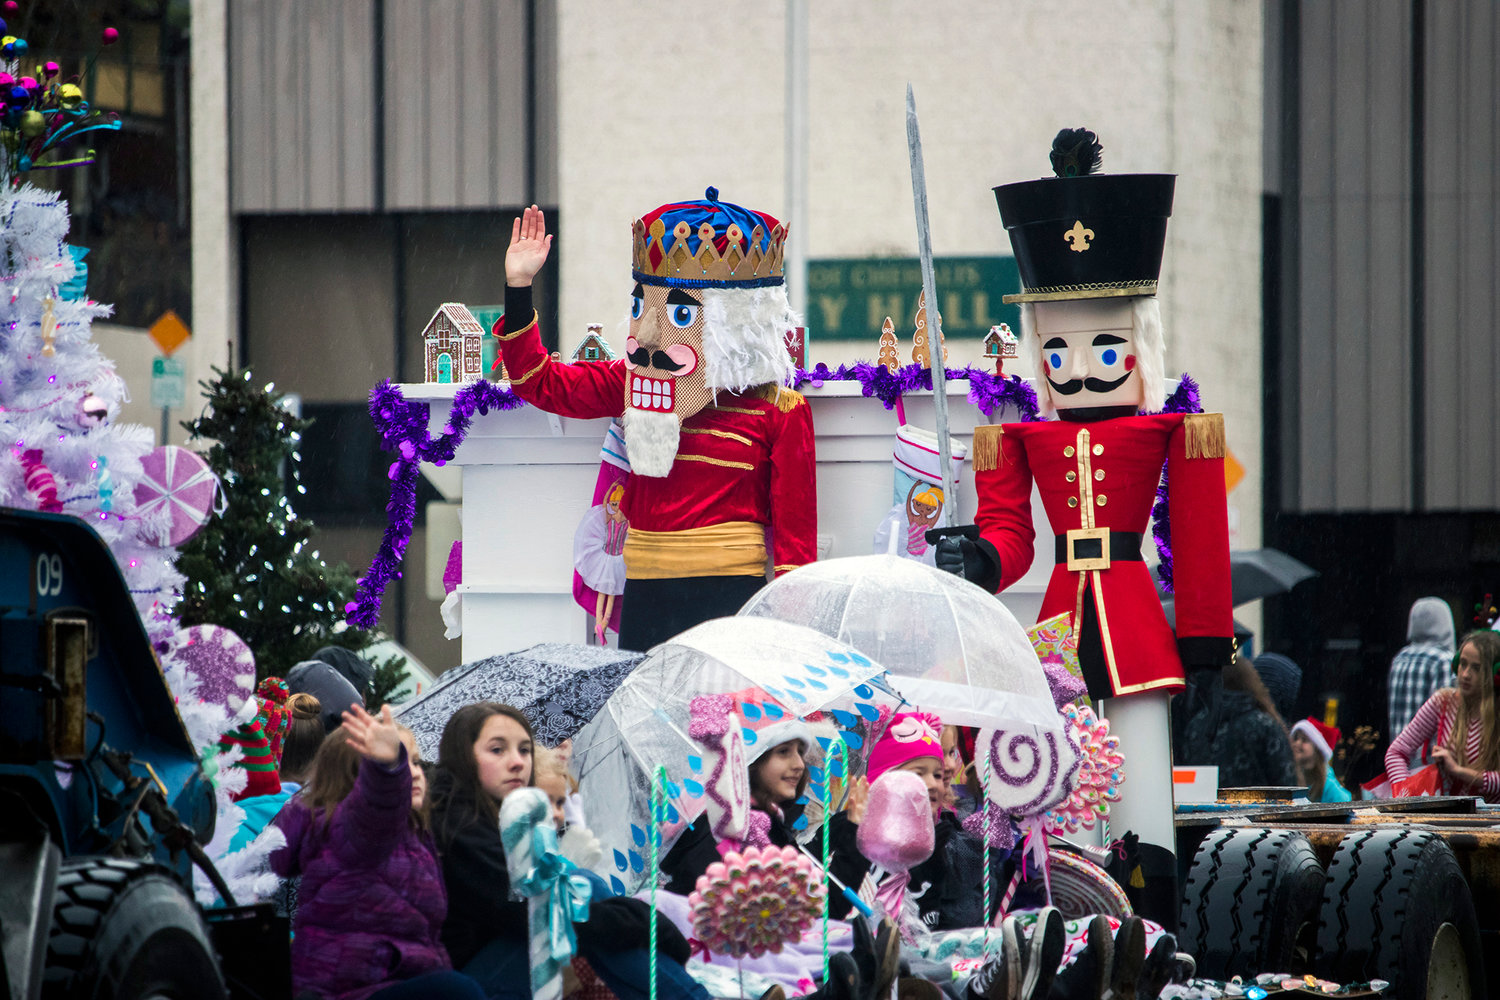 A woman dressed as a nutcracker waves to crowds during the annual Santa Parade Saturday morning in downtown Chehalis.